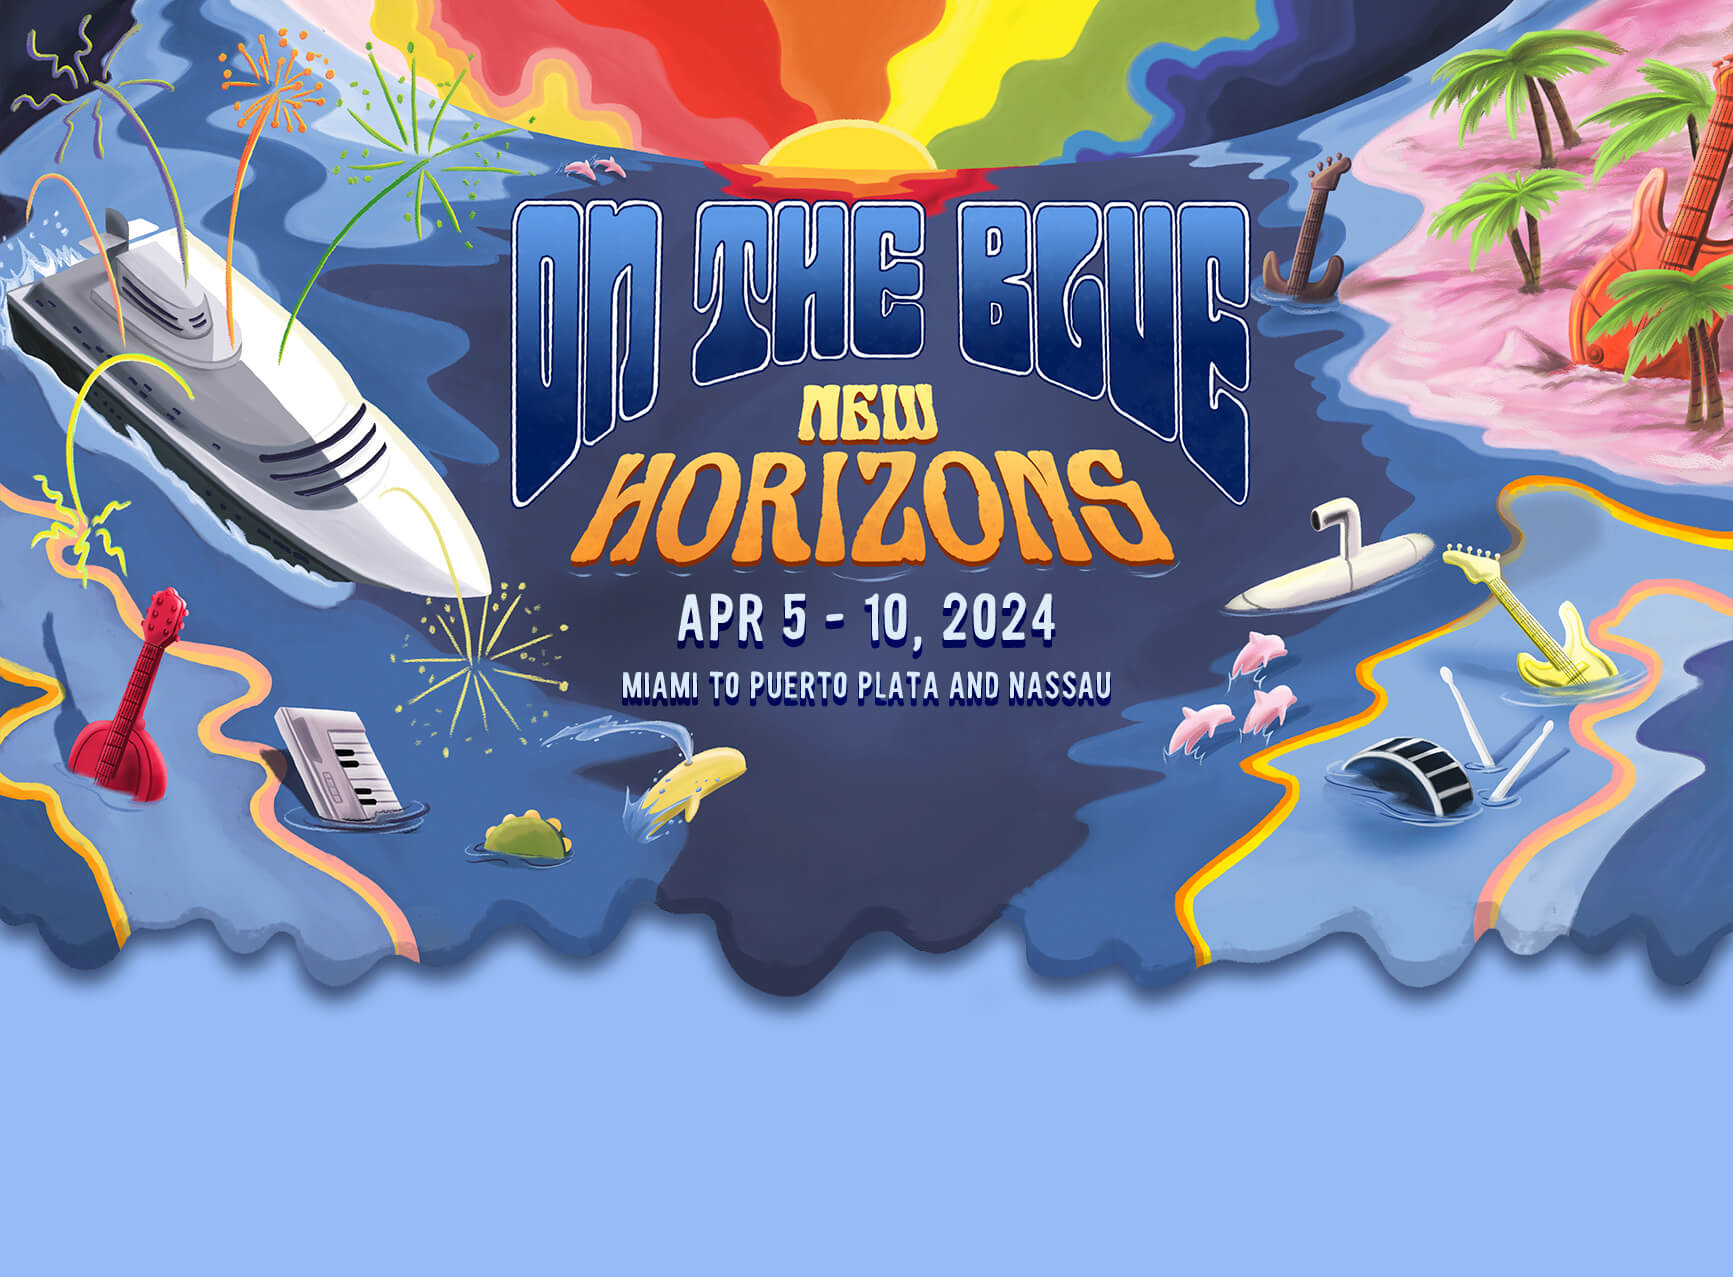 moody blues cruise 2024 schedule